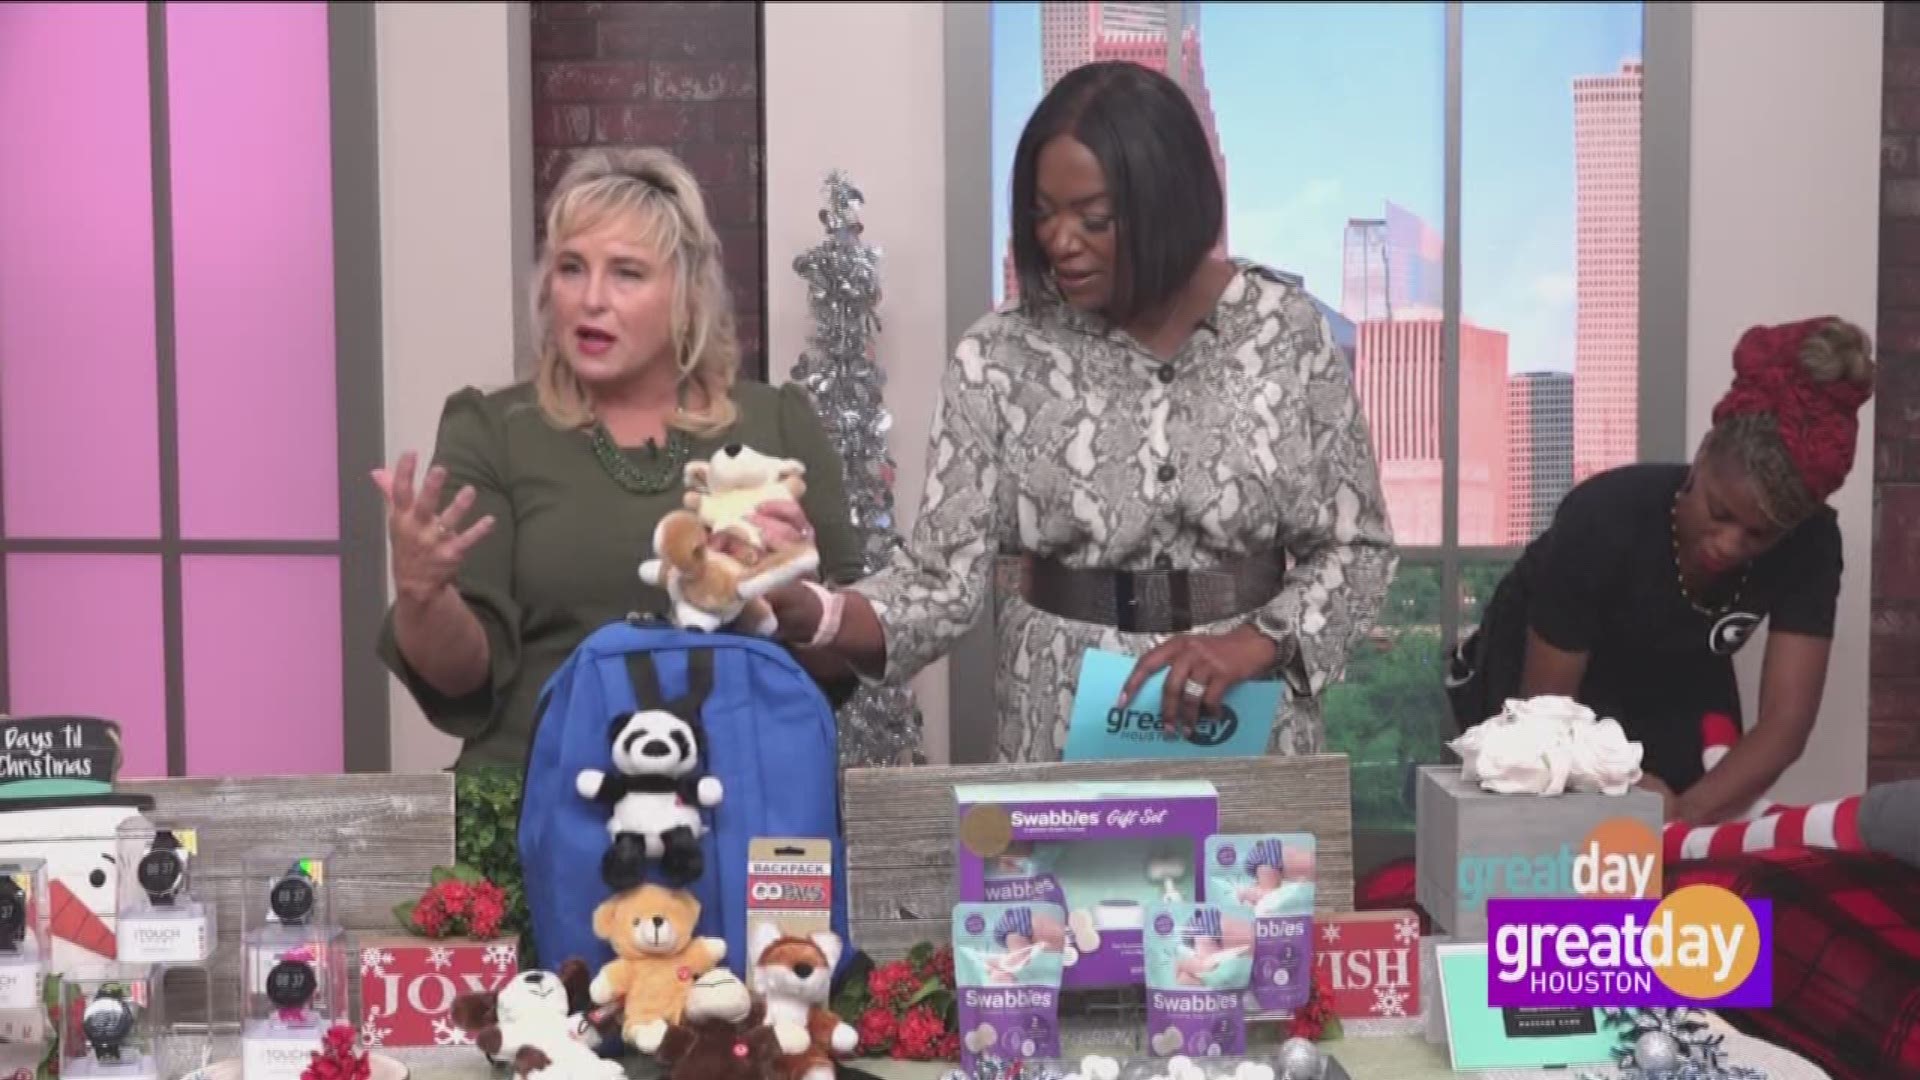 Dawn McCarthy of Dawn's Corner stopped by Great Day Houston with her favorite holiday gift ideas for everyone in the family.